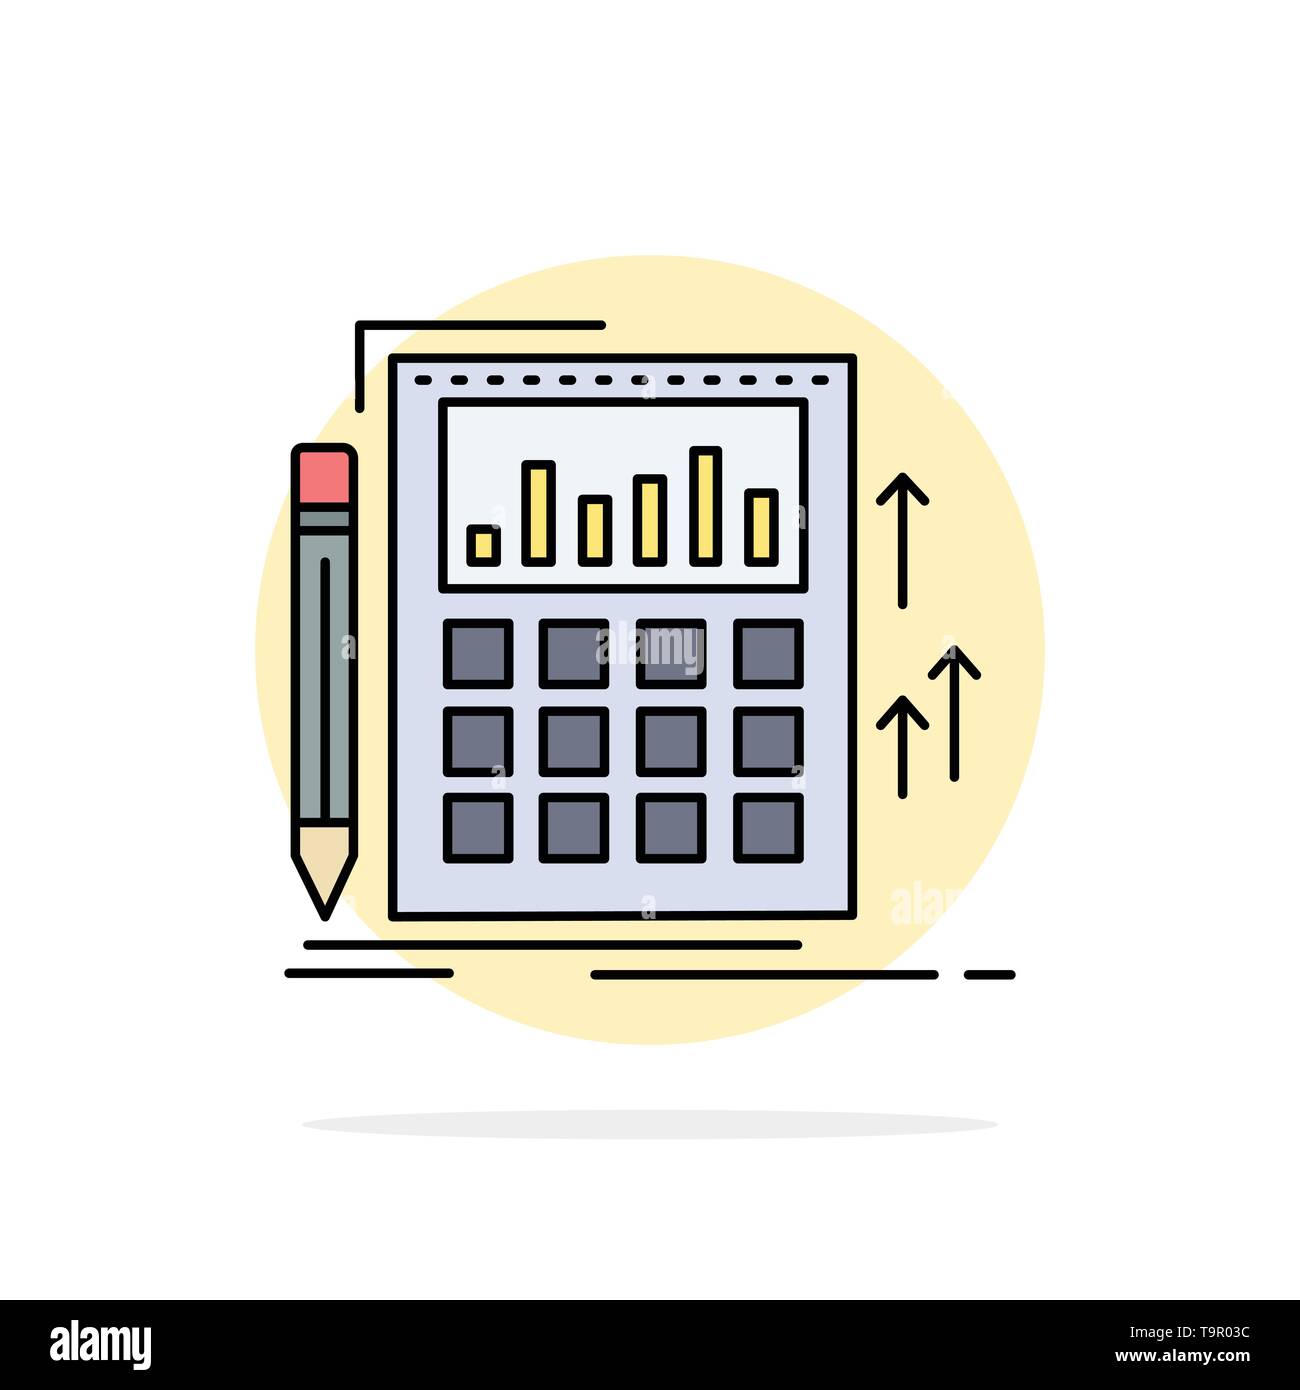 Accounting, audit, banking, calculation, calculator Flat Color Icon Vector Stock Vector